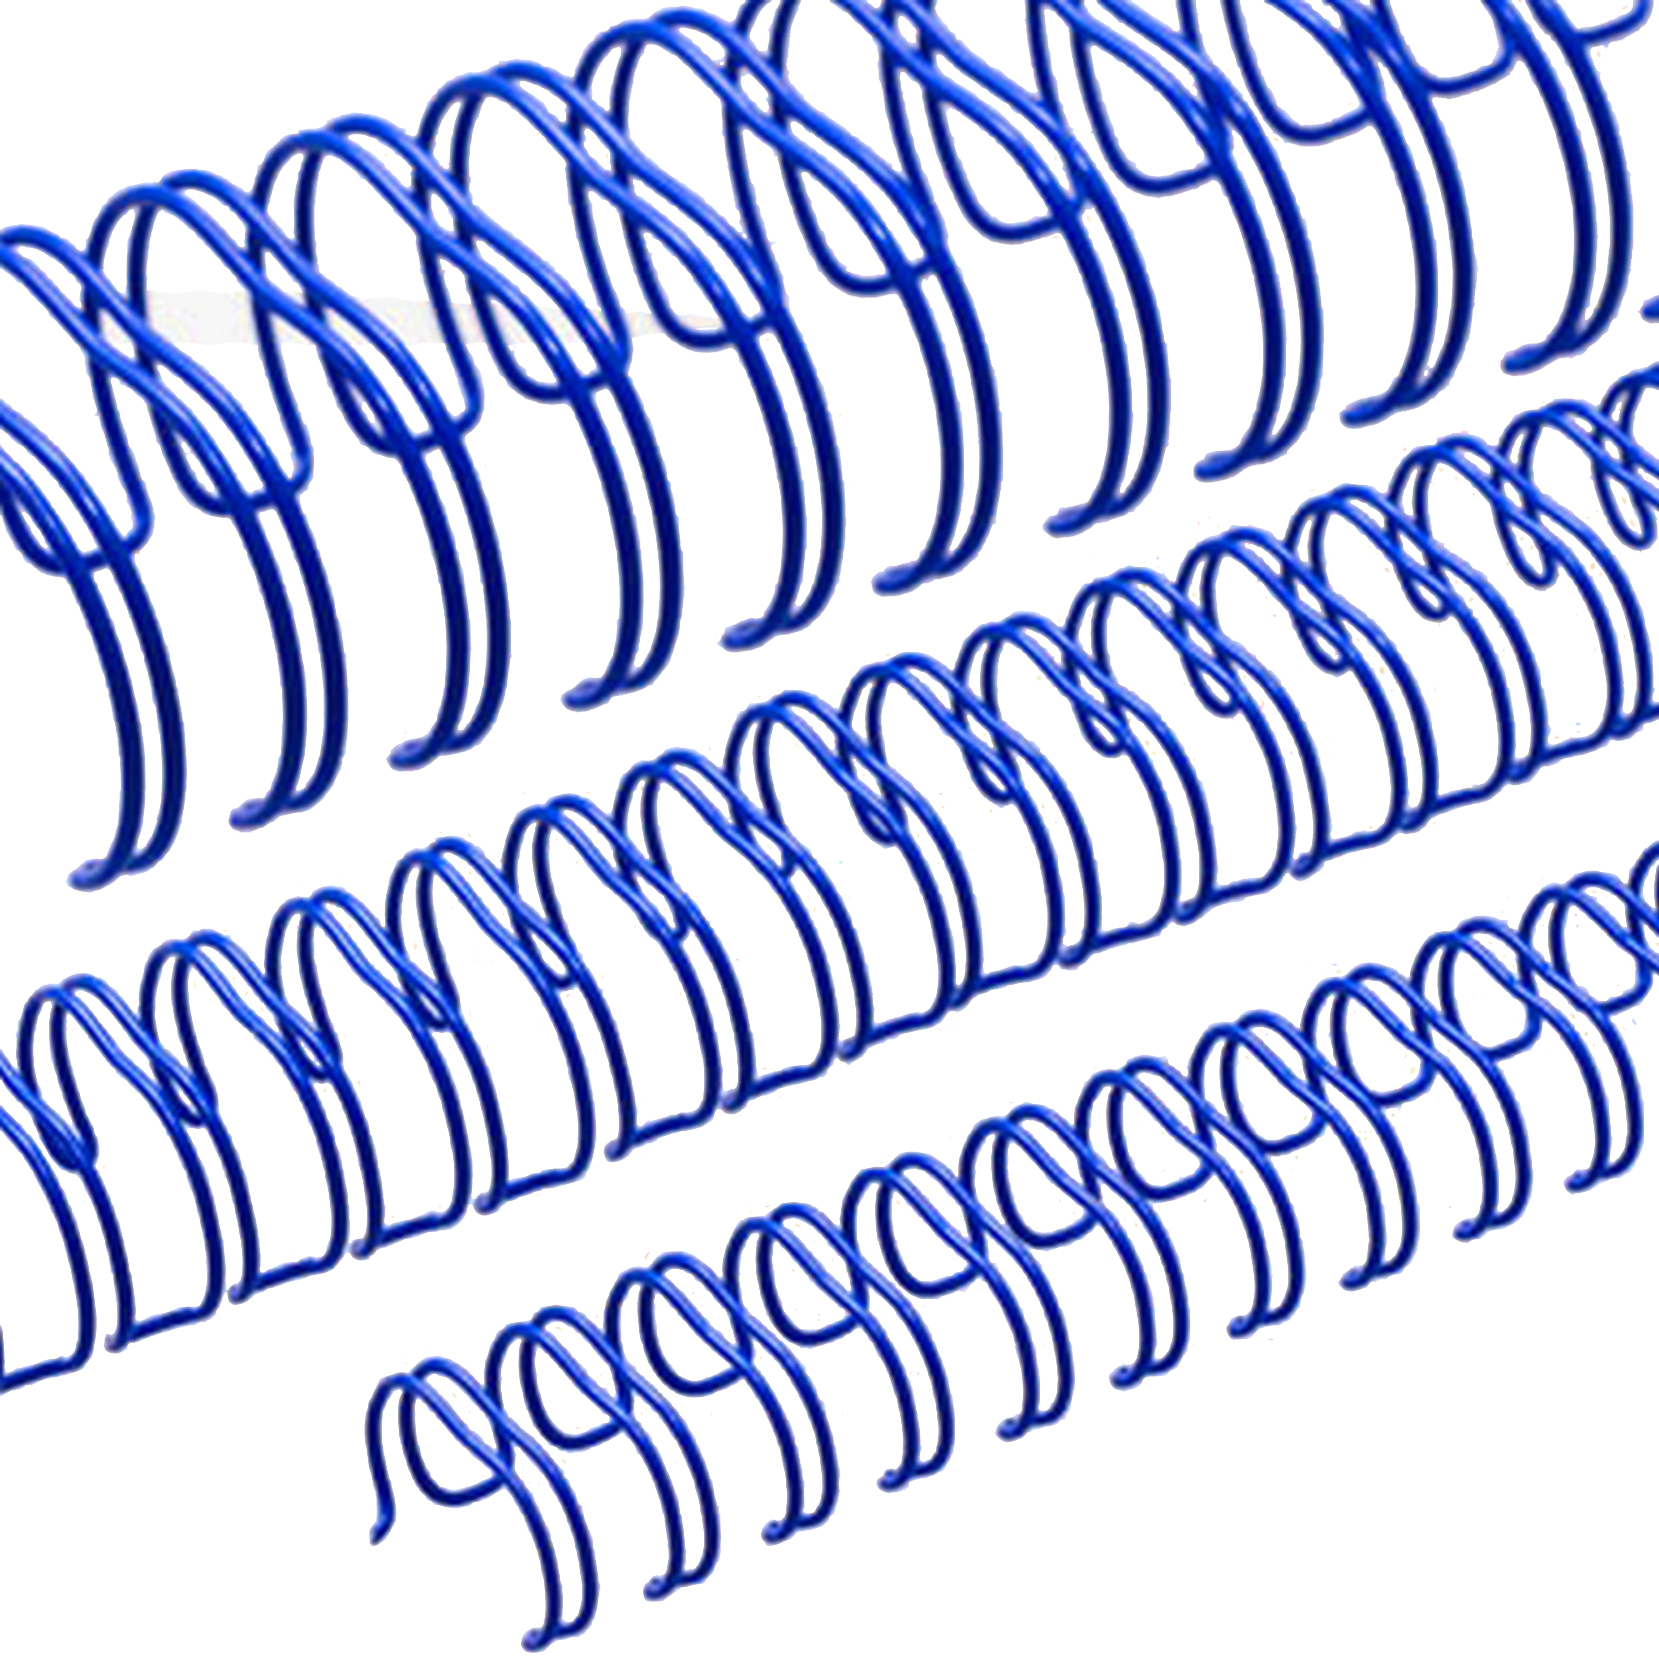 Wire comb bindings - 3:1 pitch - Diameter (in mm) 5.5 (3/16") - Colour blue - to be processed in wire-comb binding machines...